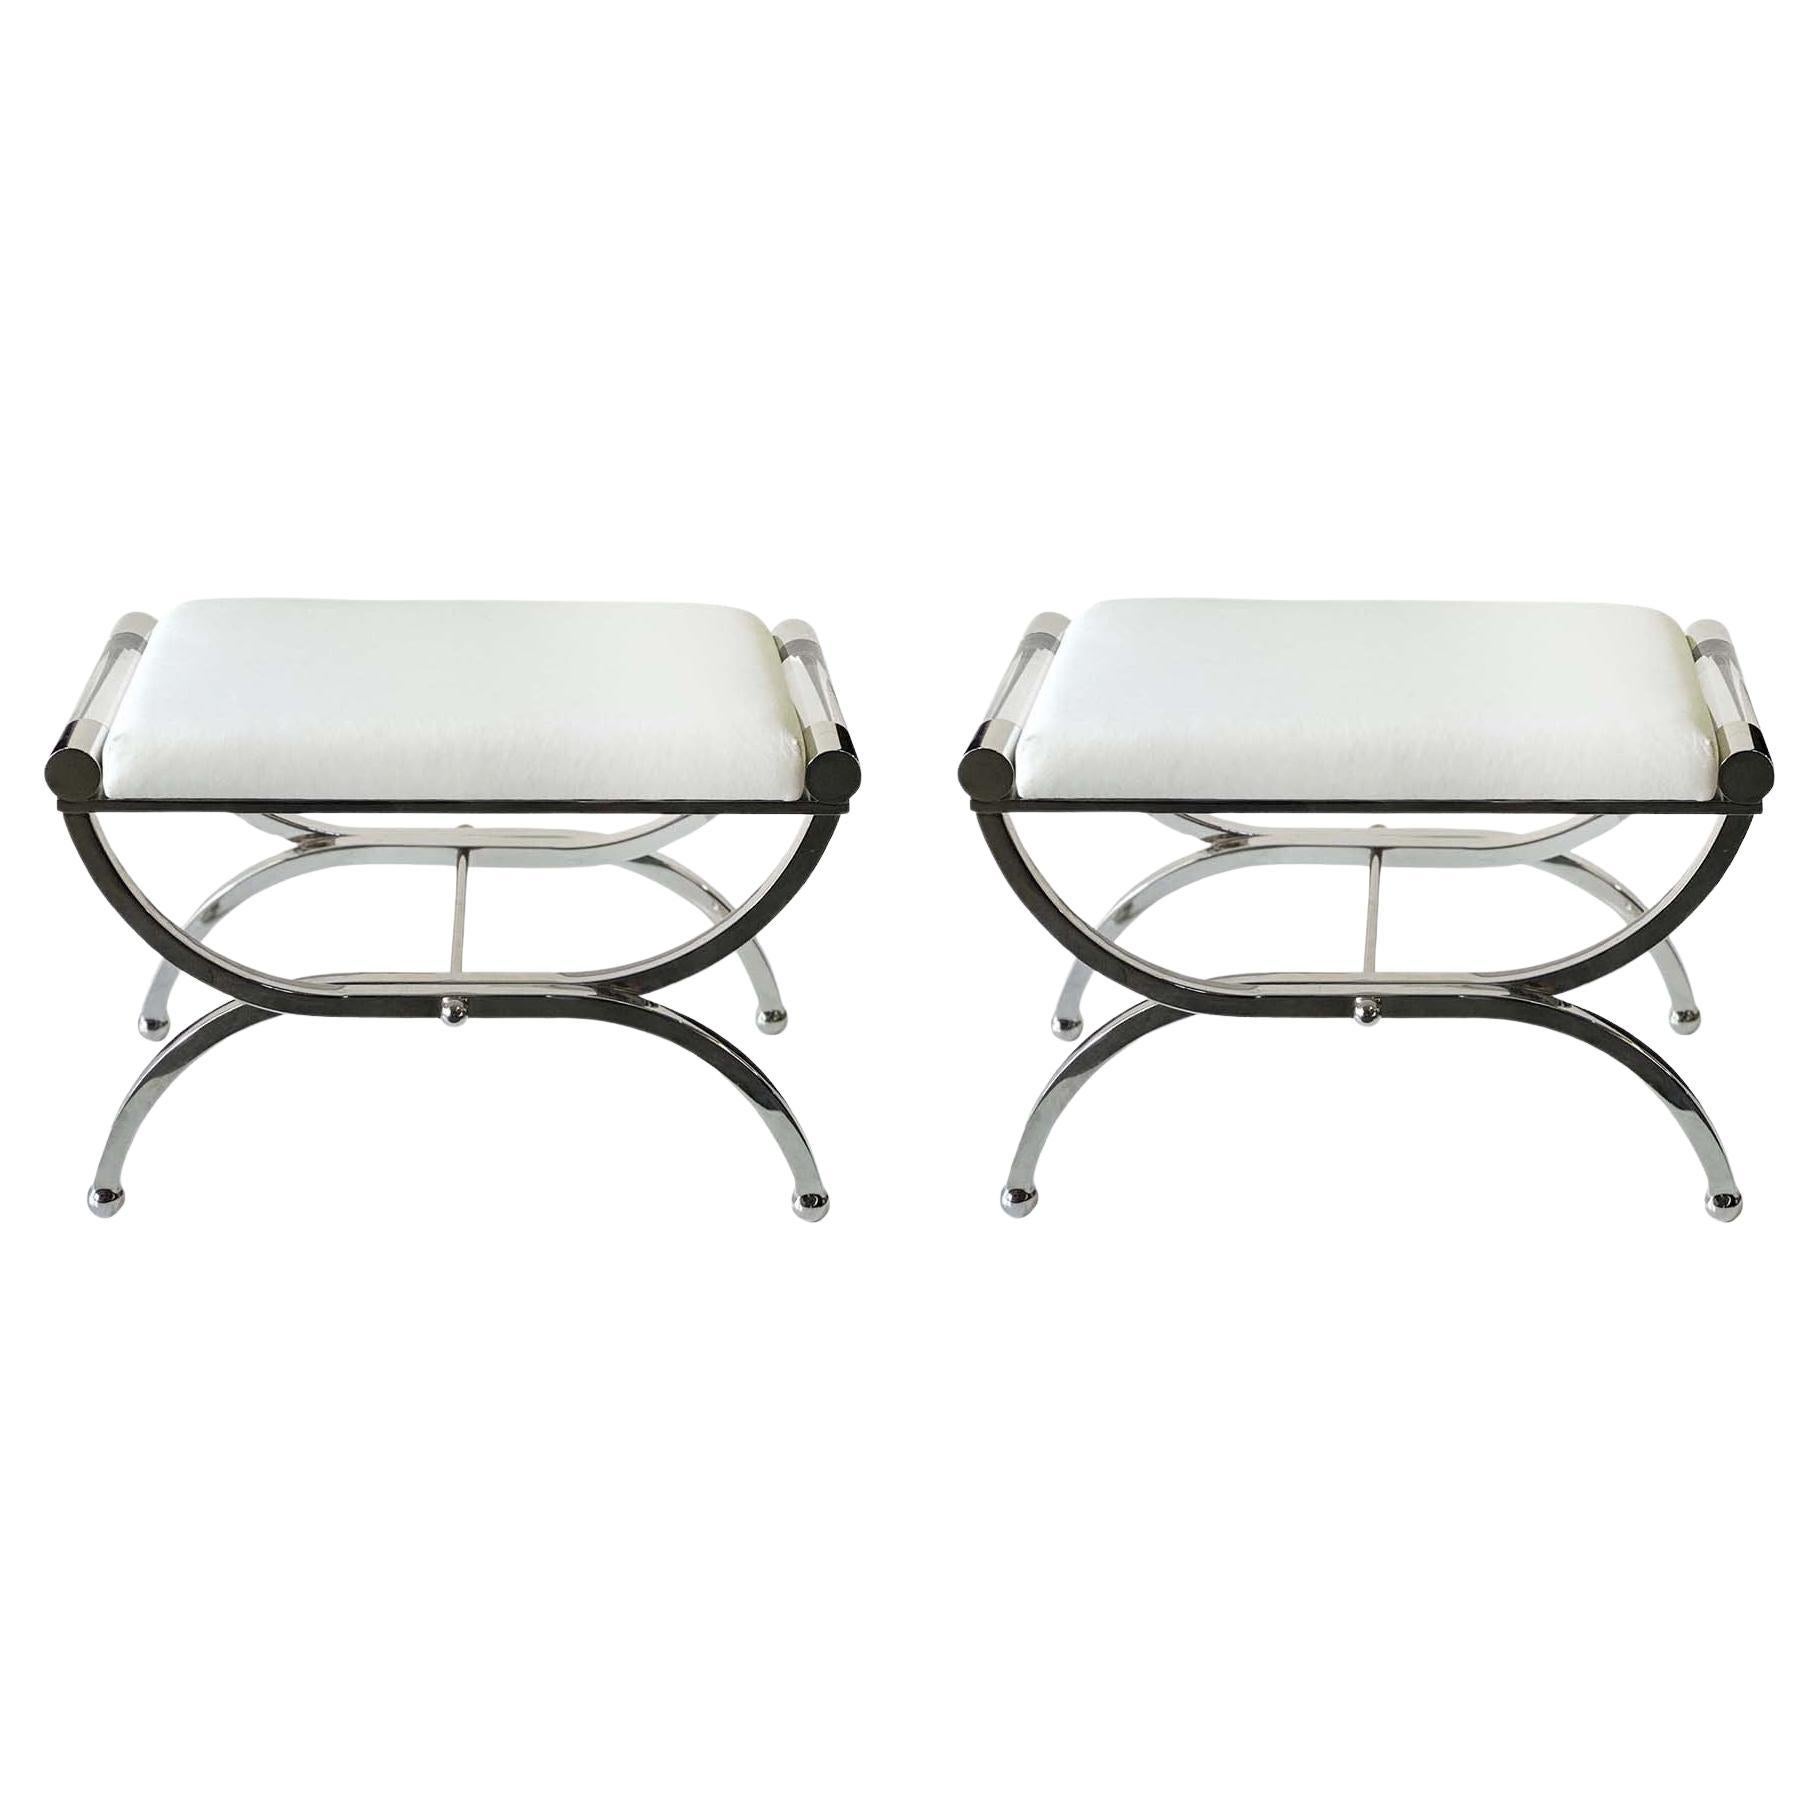 Pair of Lucite & Polished Nickel Benches by Charles Hollis Jones, c. 1980's For Sale